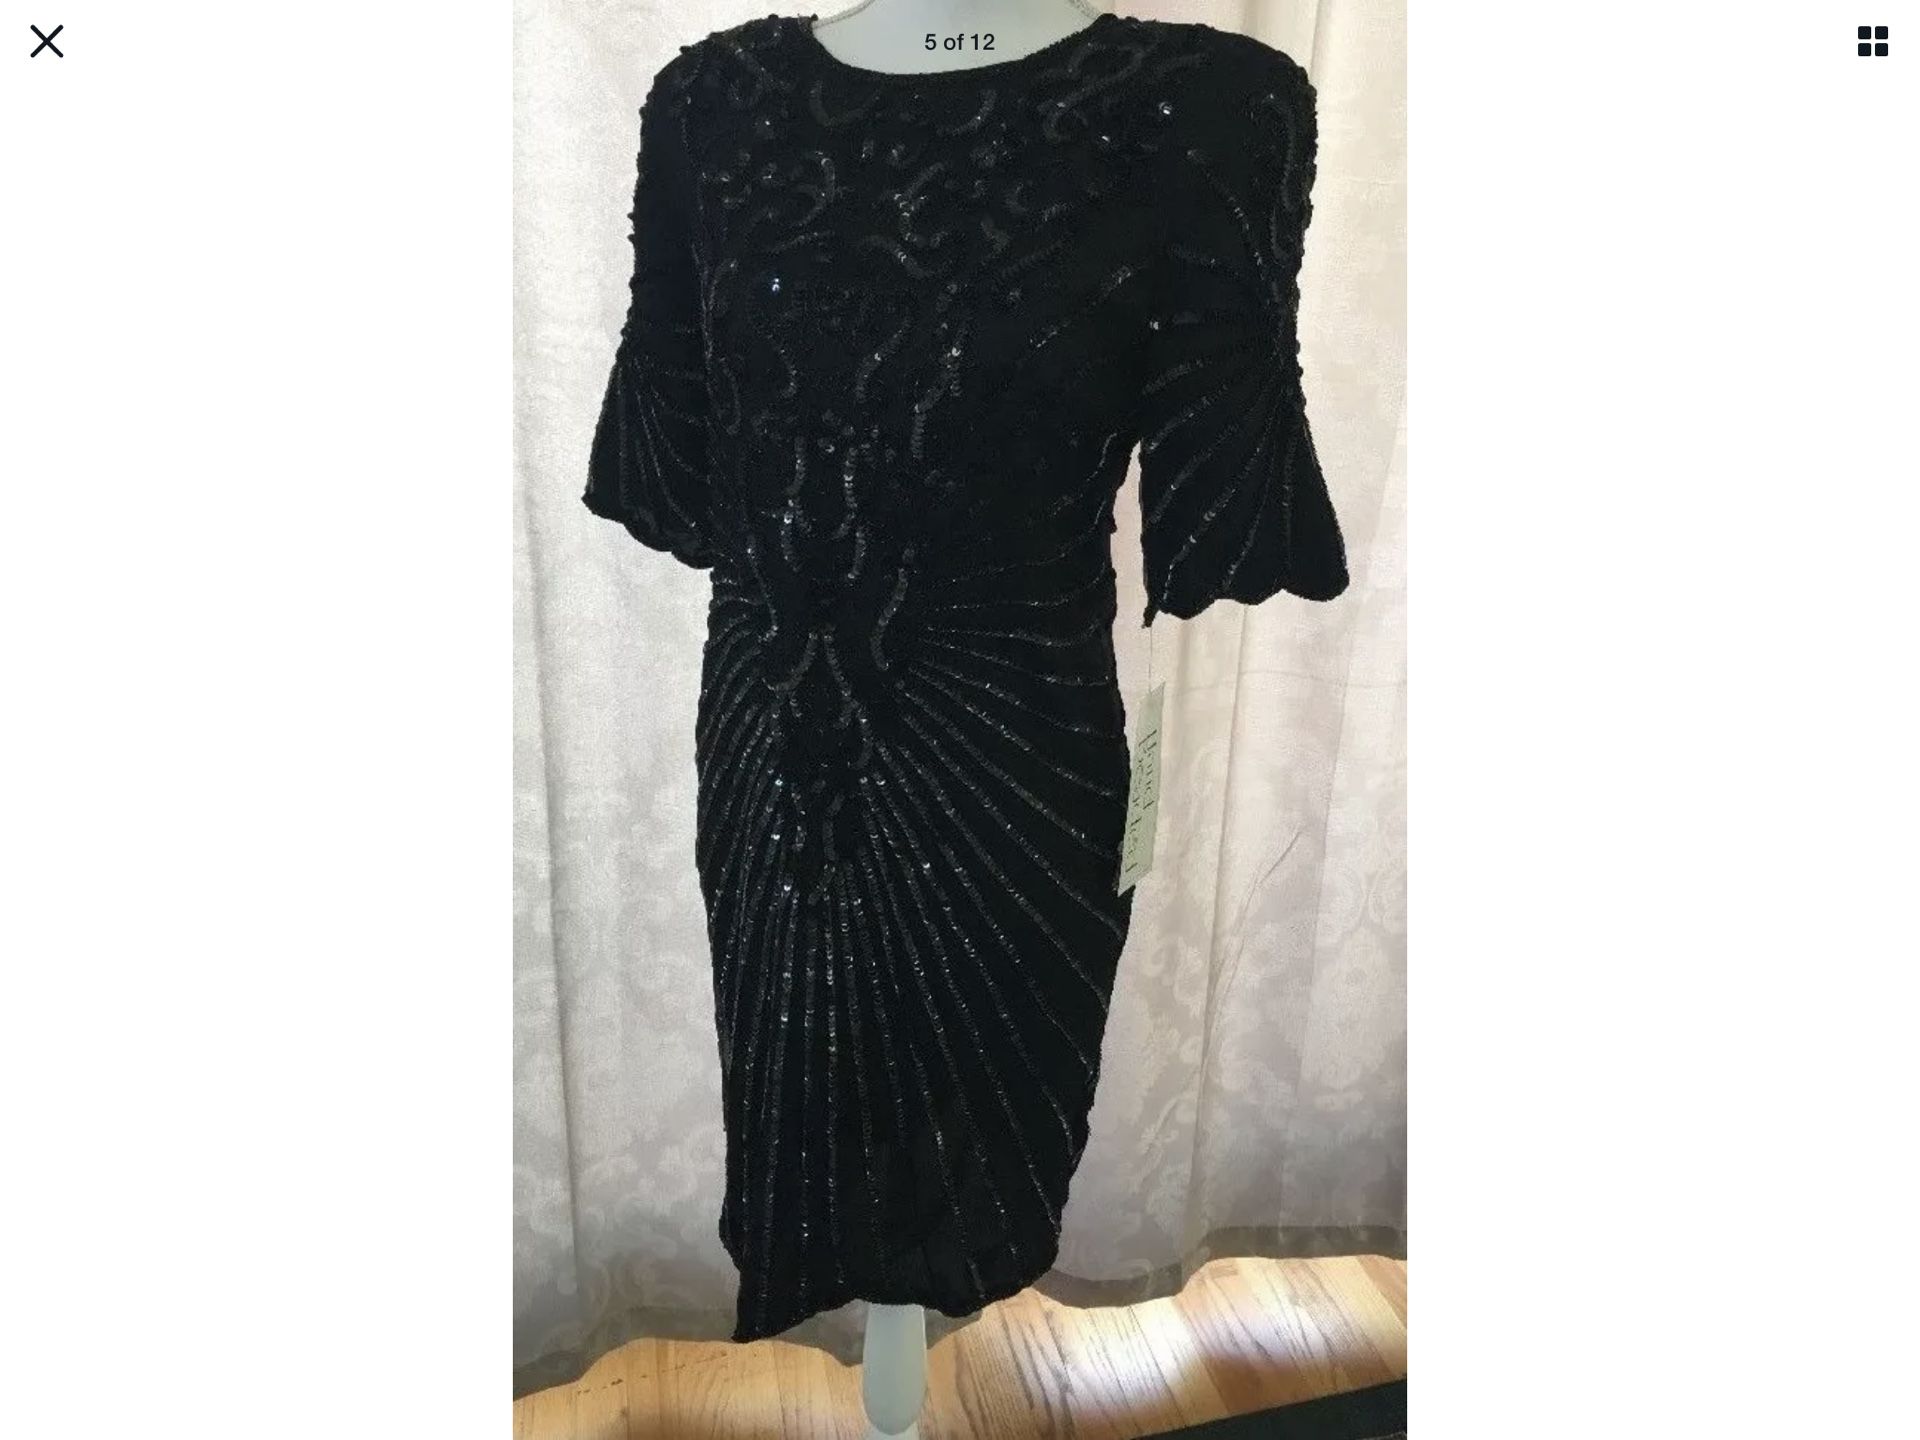 New Style Works Black Silk Hand Beaded & Sequined Lined Cocktail Dress Size 4